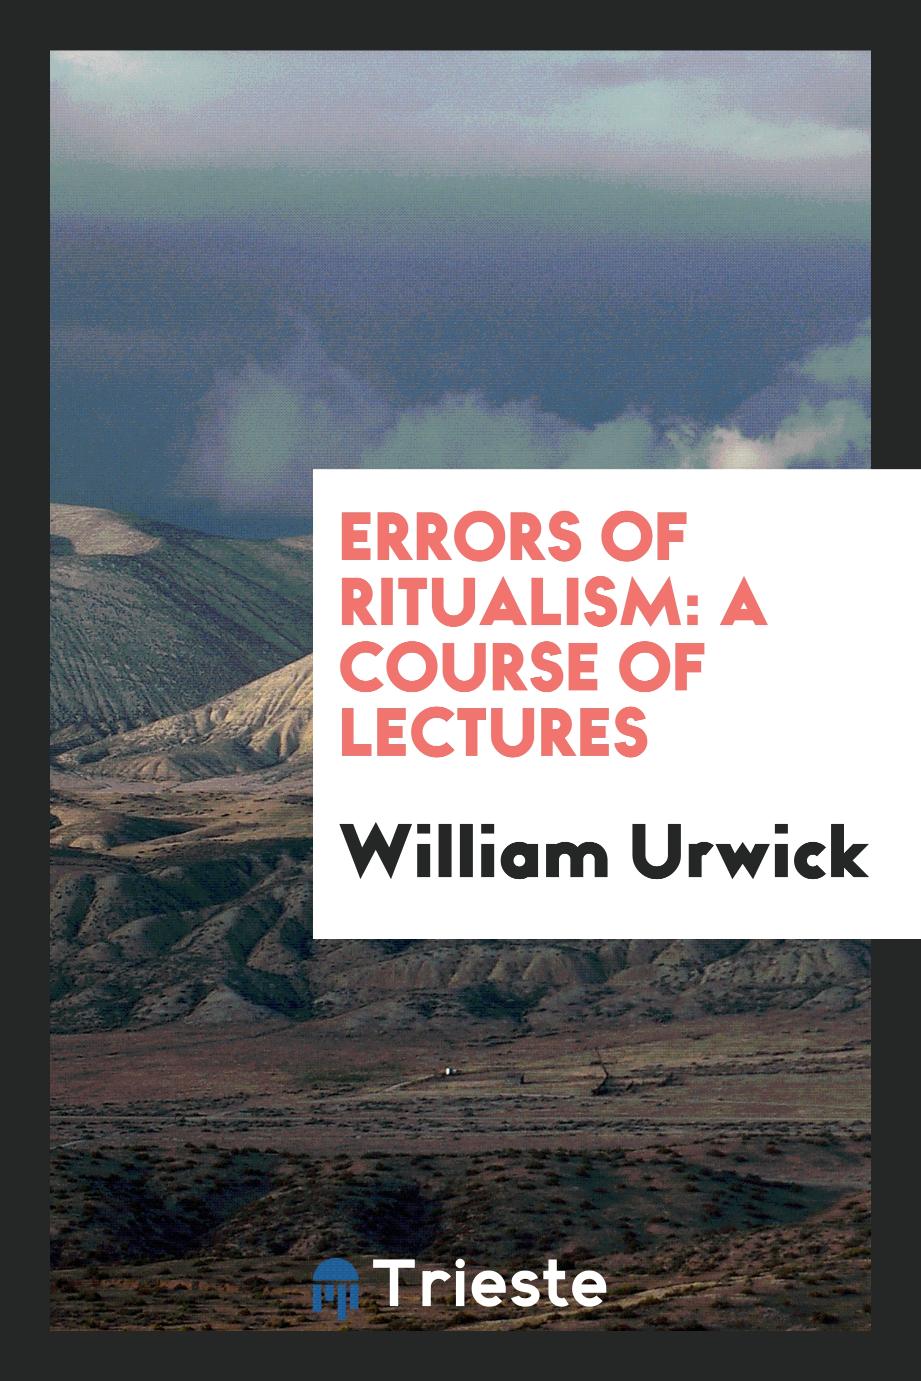 Errors of Ritualism: A Course of Lectures